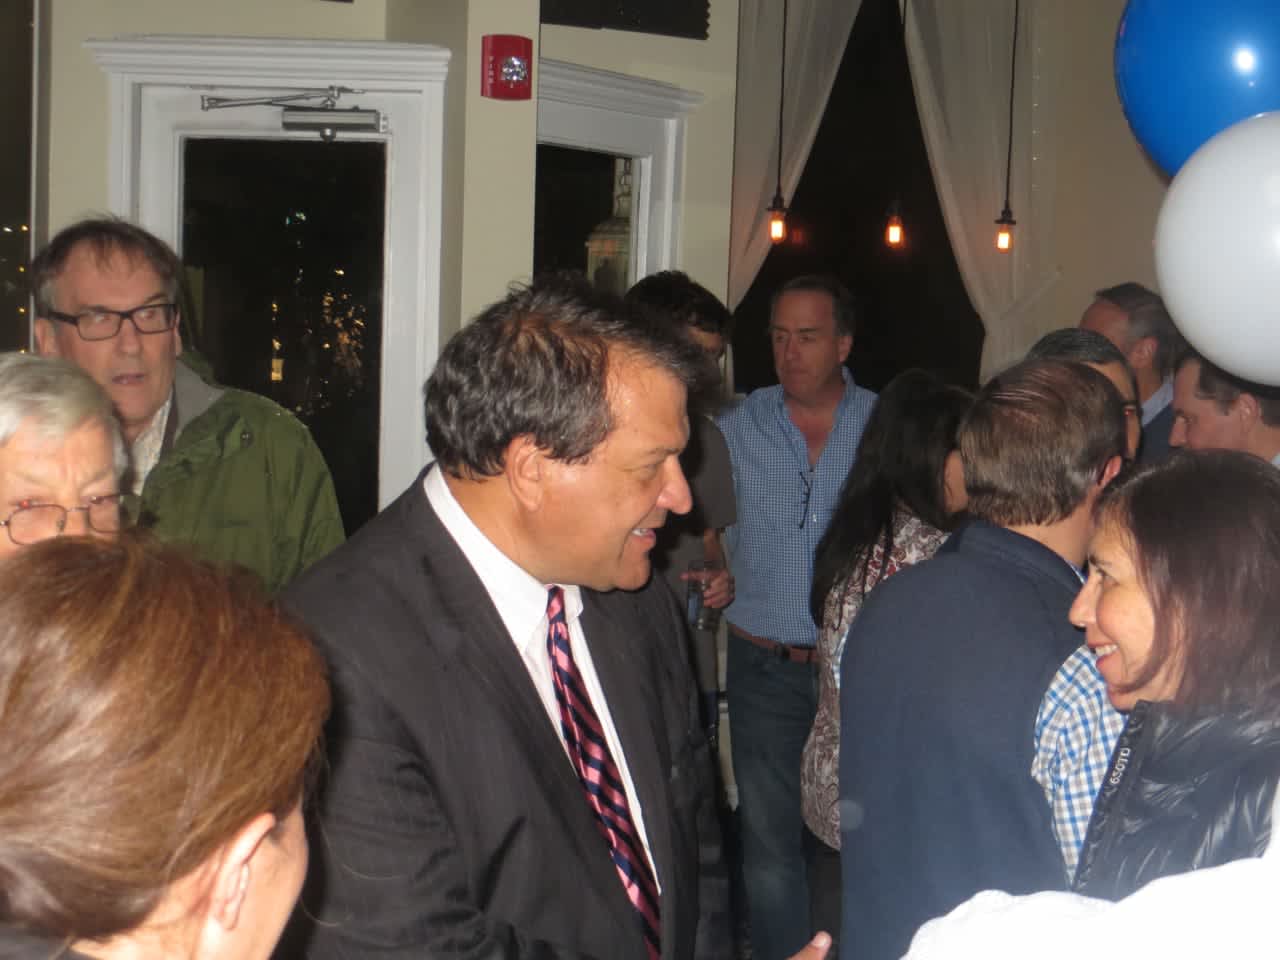 State Sen. George Latimer thanked supporters on Tuesday night during the first of three "election celebration" parties at Rosemary & Vine restaurant in his hometown of Rye. The Democrat led Westchester County Executive Rob Astorino, a Republican.